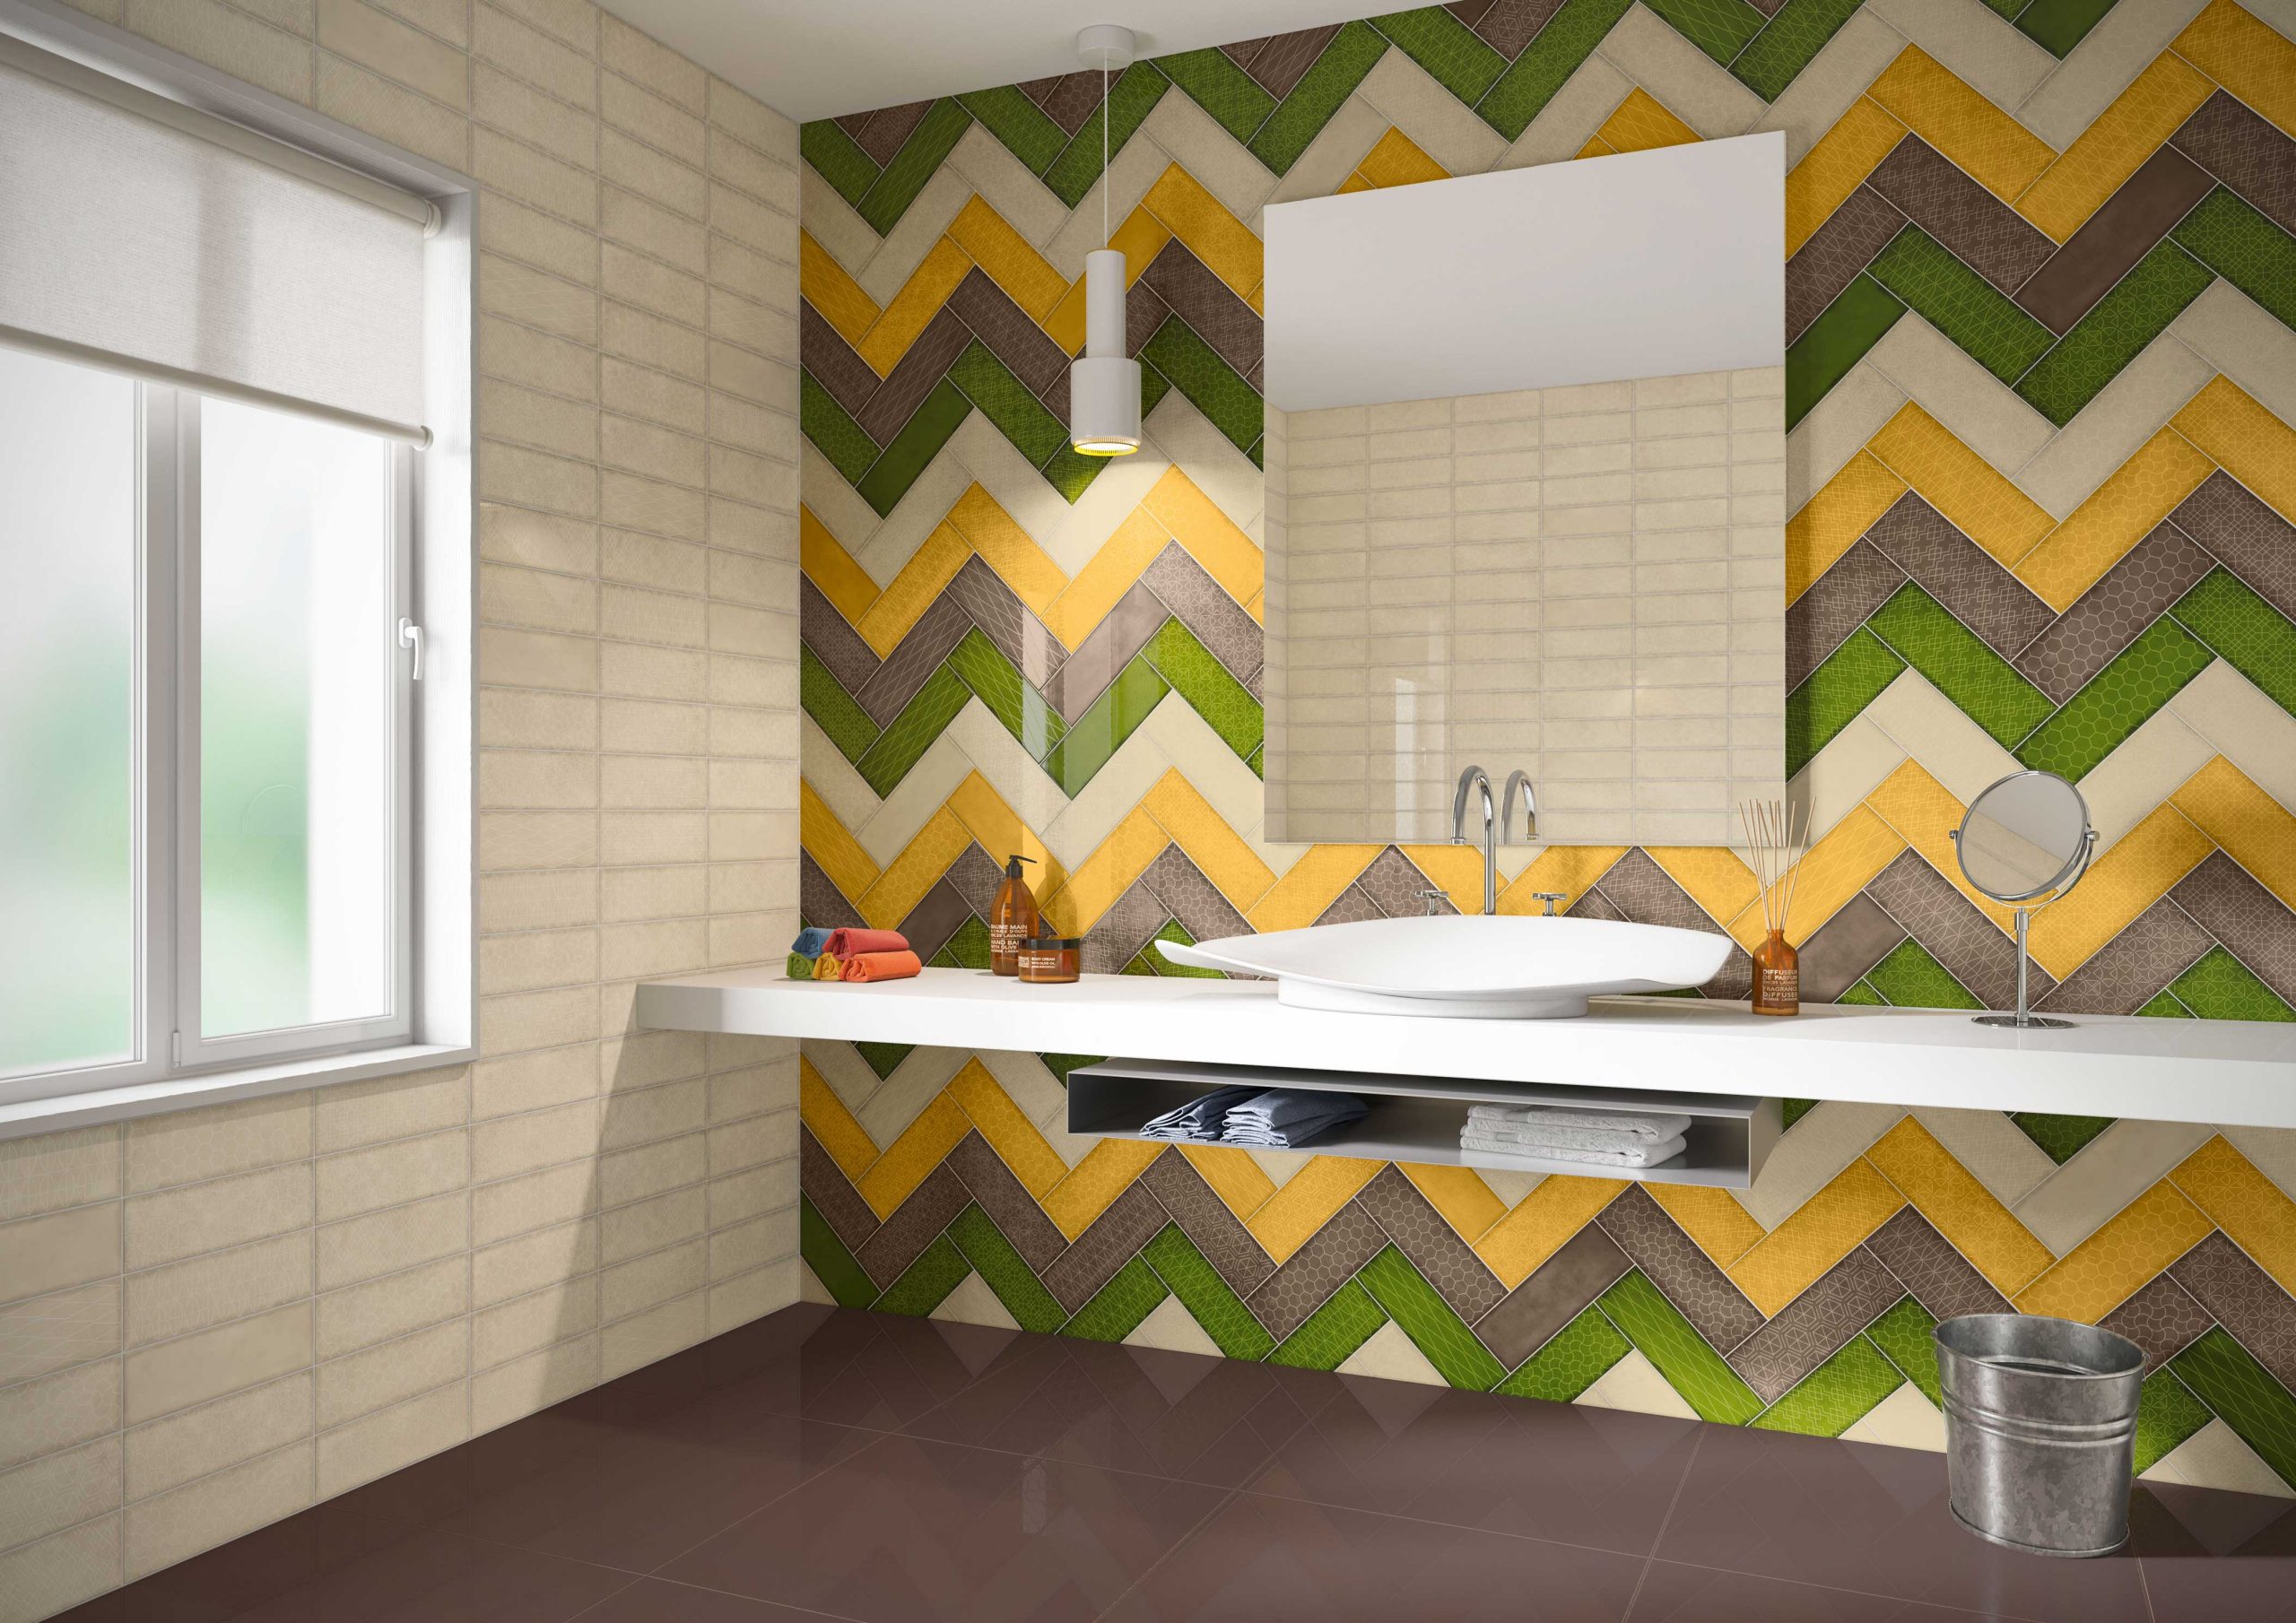 Nectar Ceramic Wall Tile Collection | Creative Materials